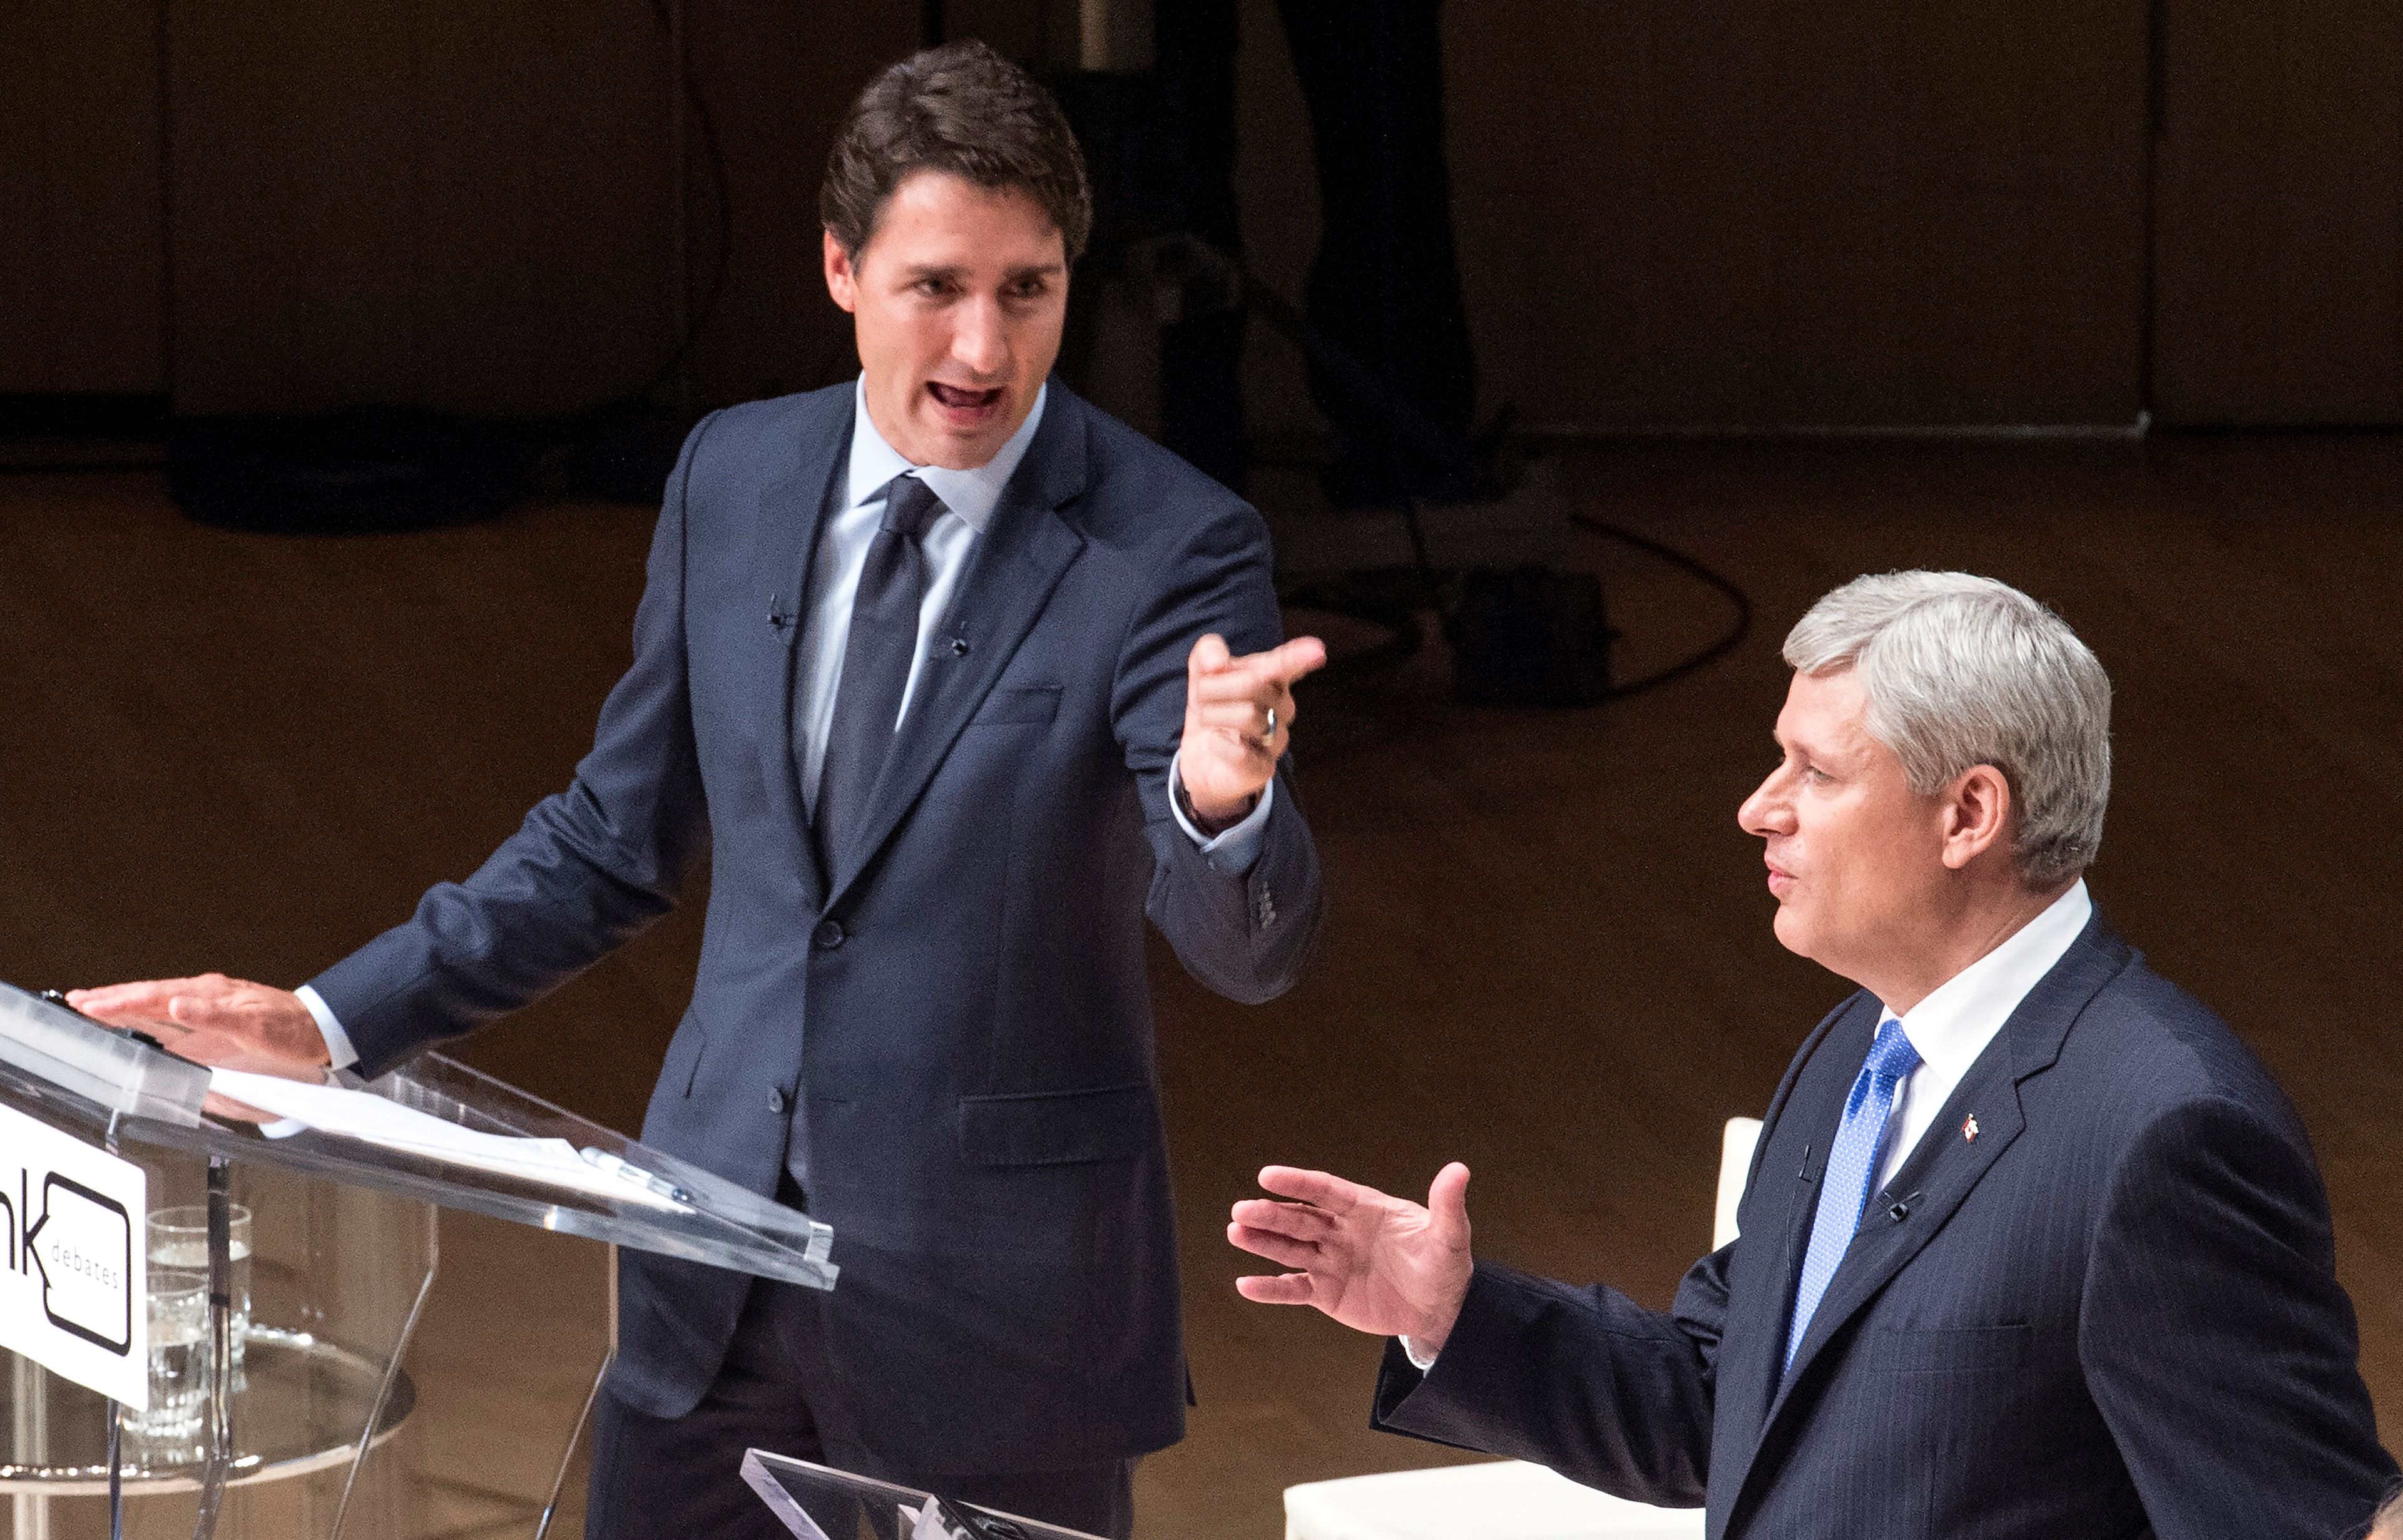 Trudeau and Harper trade words during the Munk Debate on foreign affairs, in Toronto, on Sept. 28, 2015 (Andrew Vaughan/CP)